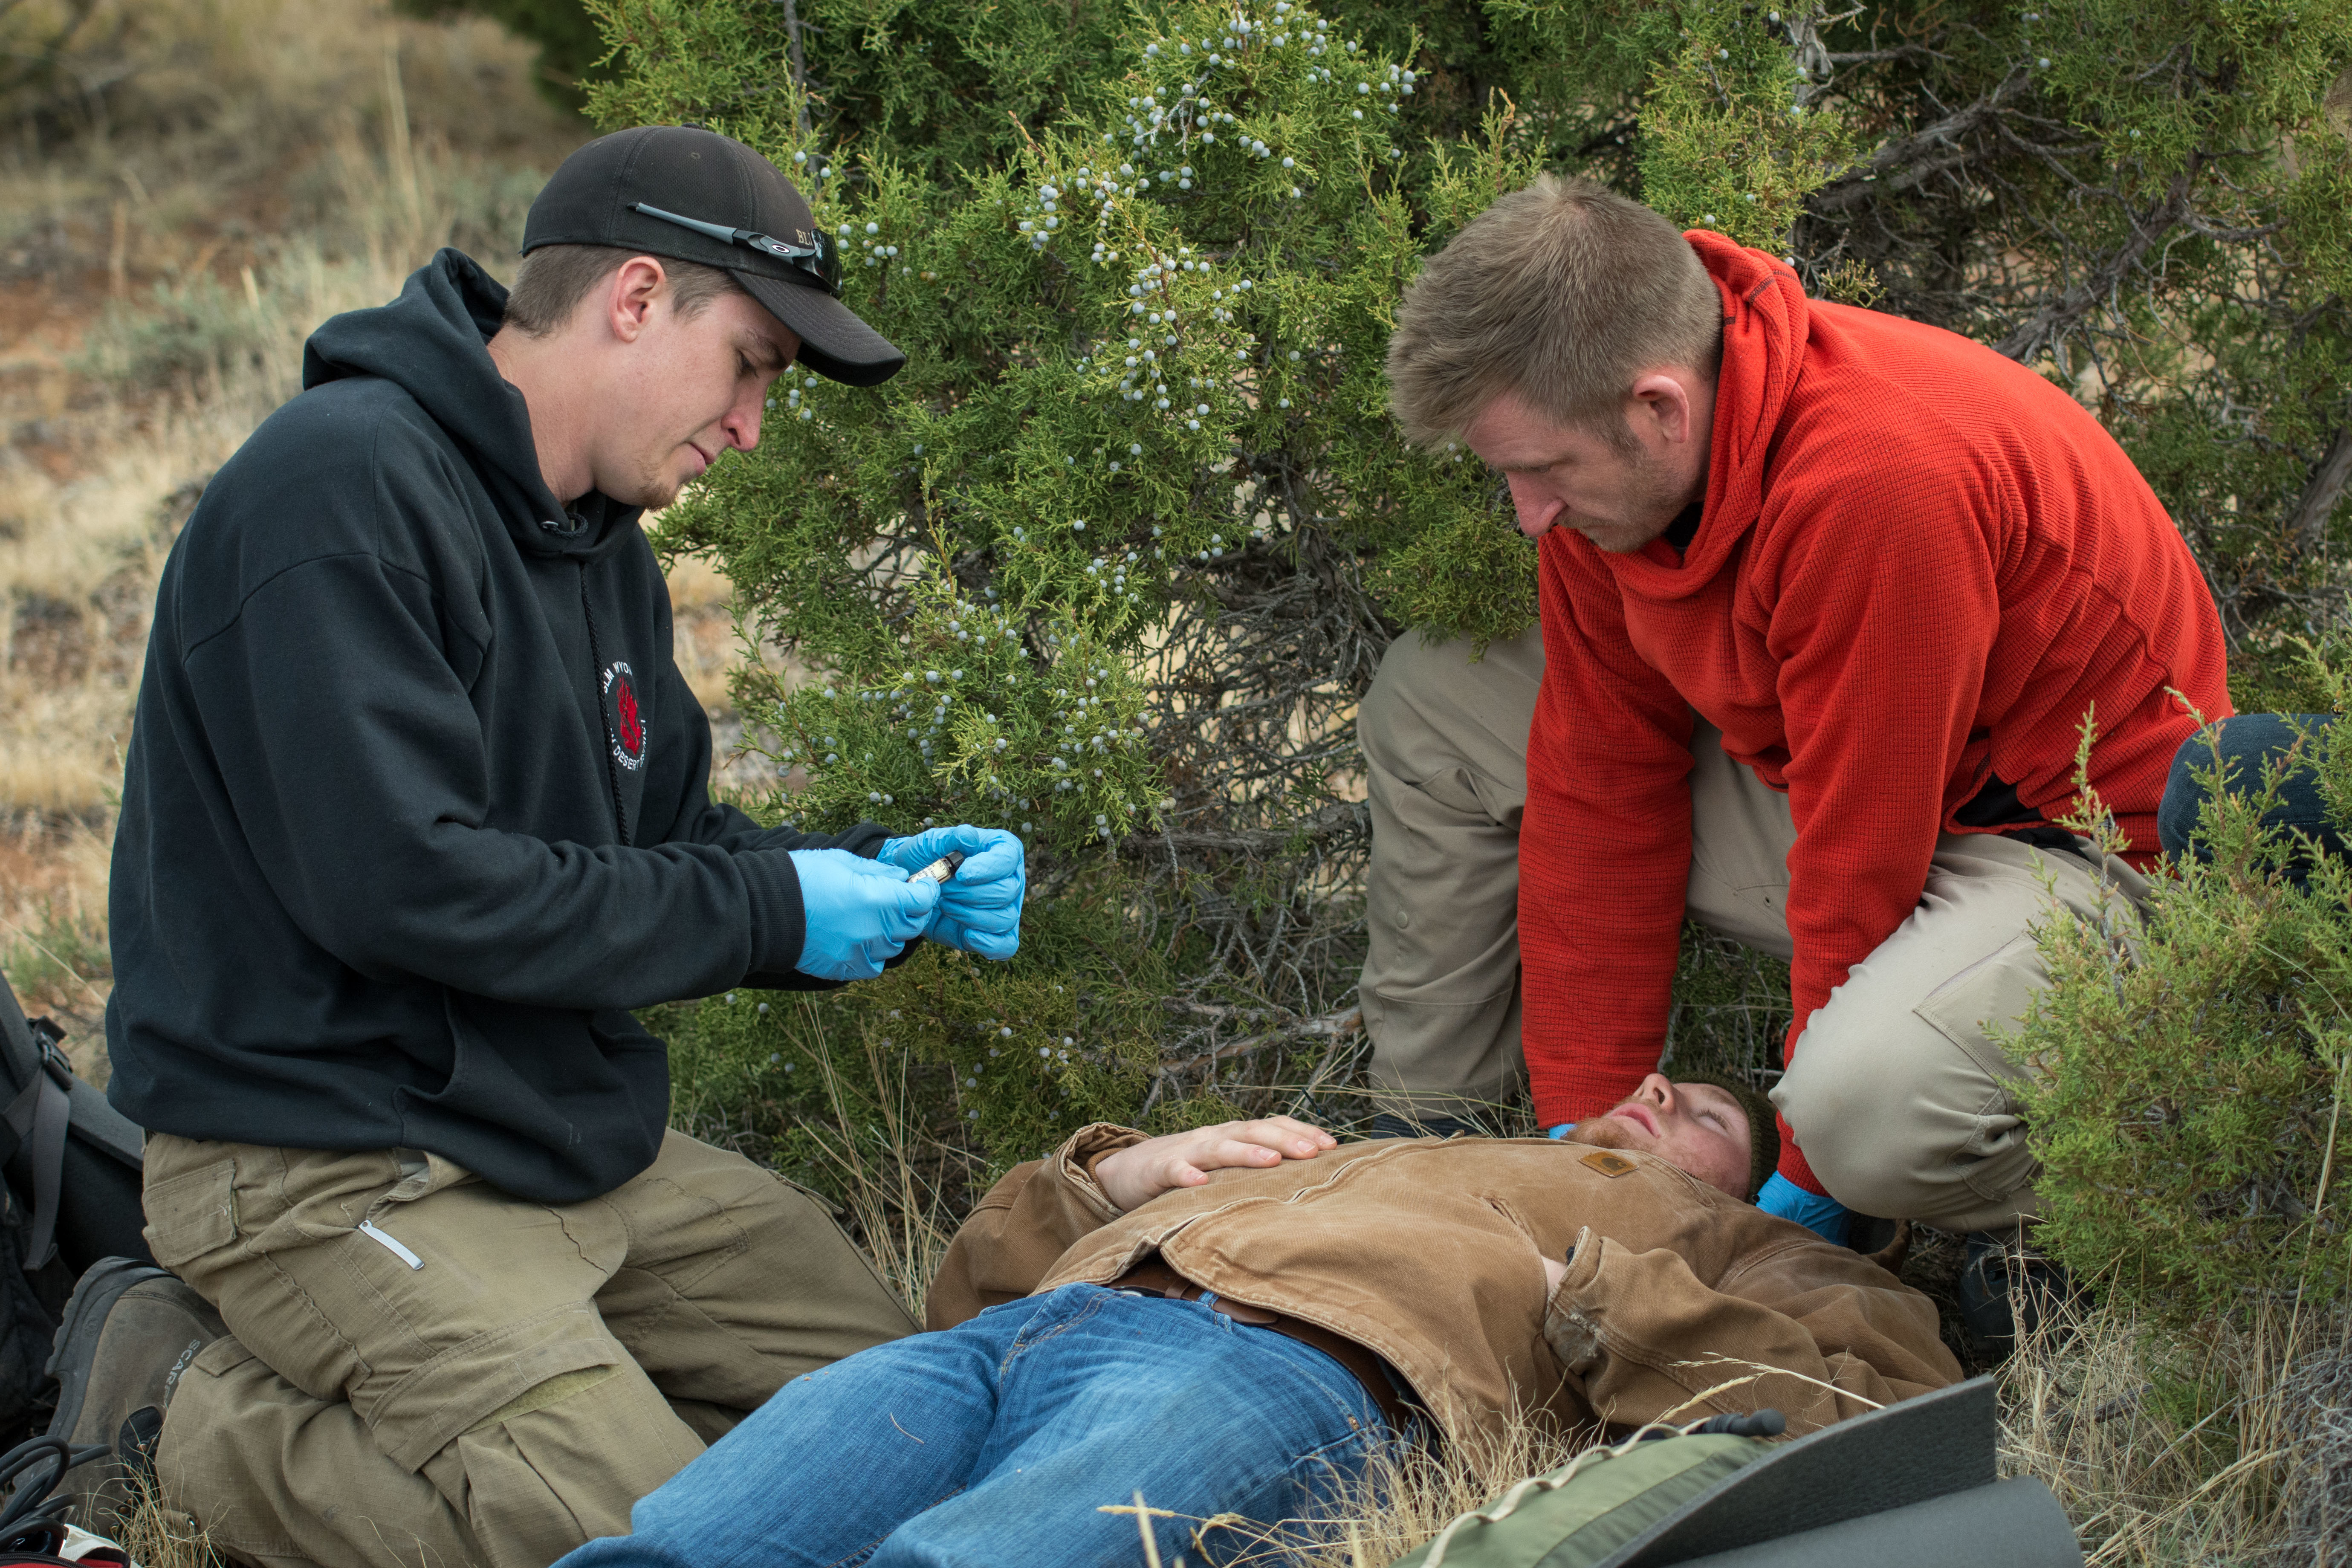 Two responders take the vitals of a patient in the backcountry during a scenario on a NOLS course